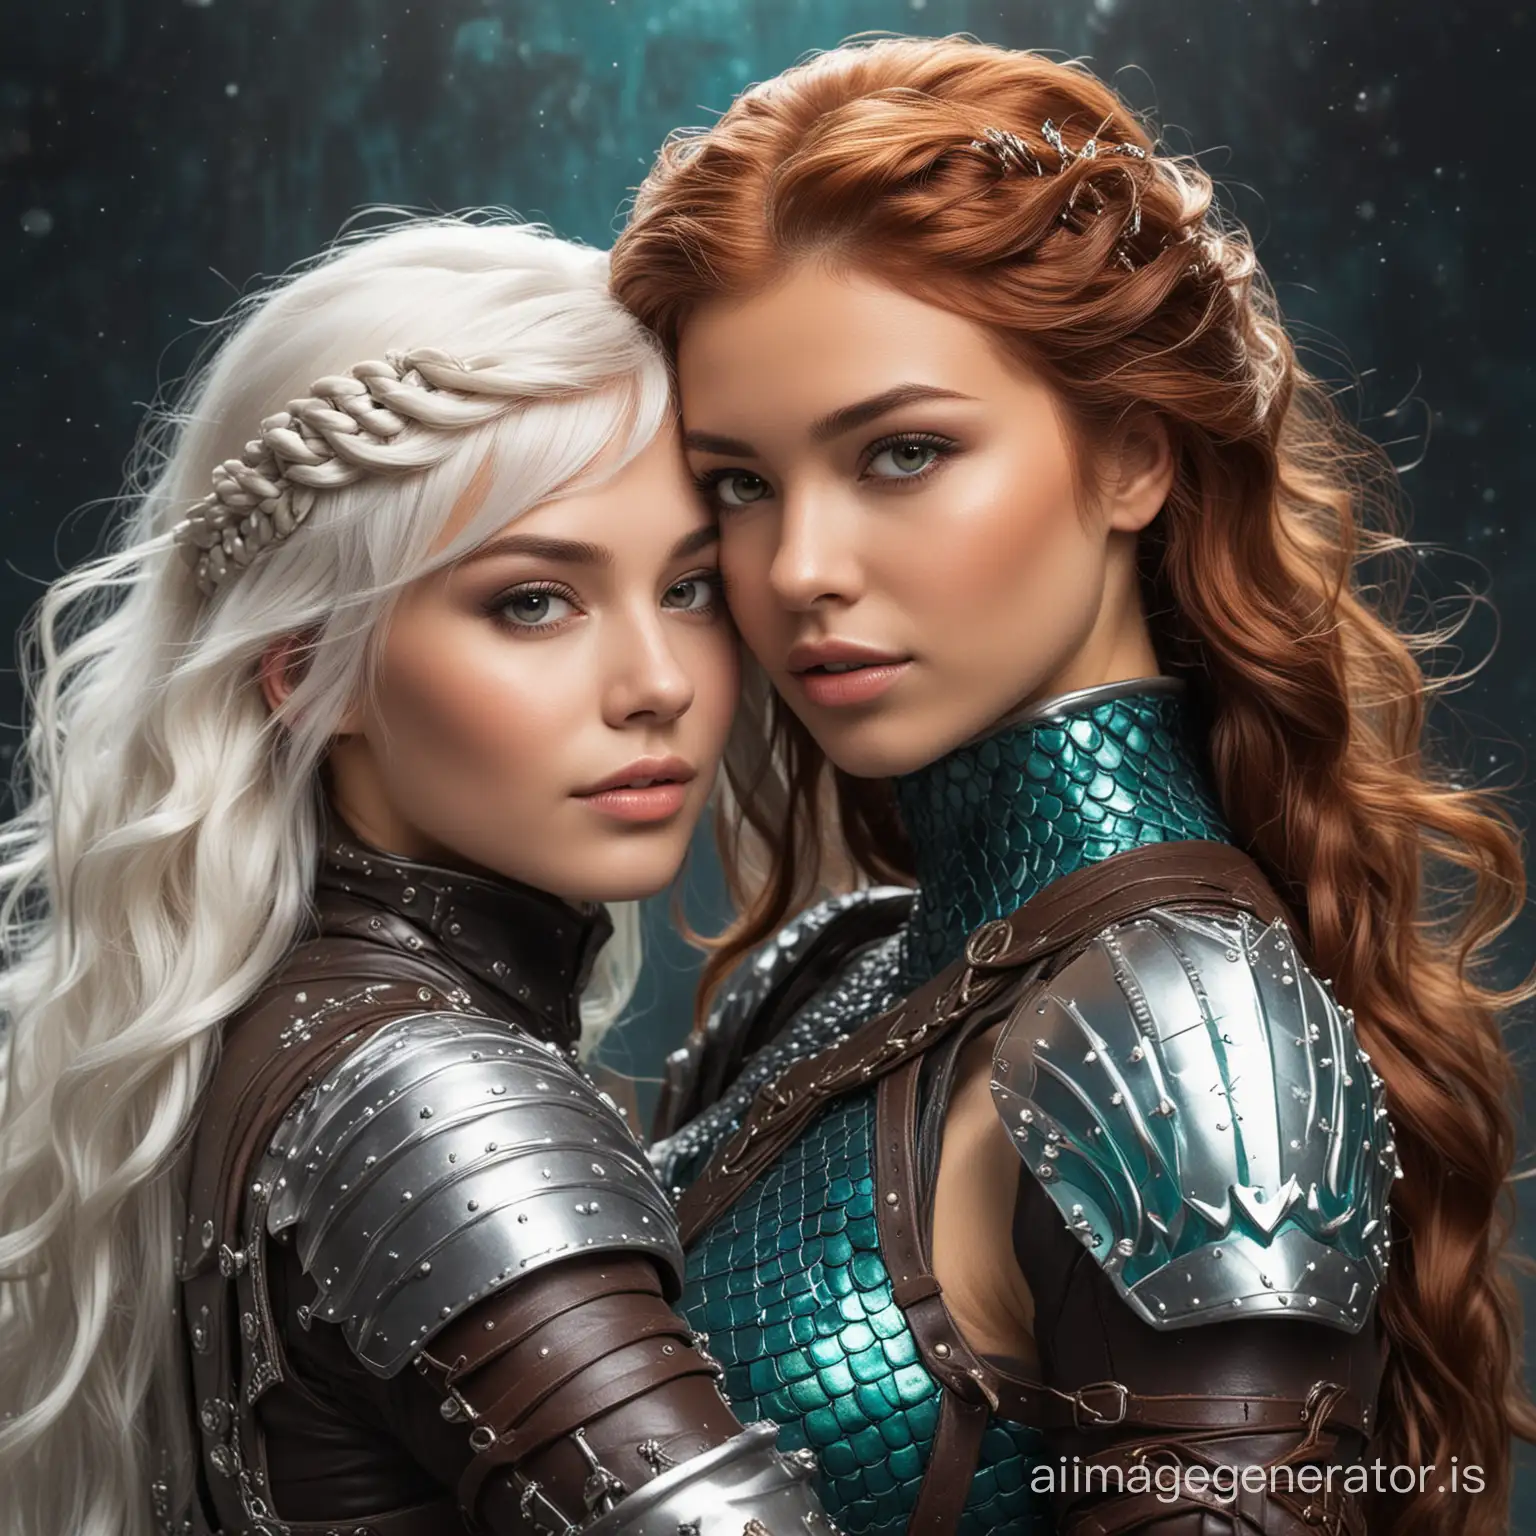 Eskimo-Princess-and-Mermaid-Embrace-in-Leather-Armor-and-Flowing-Hair